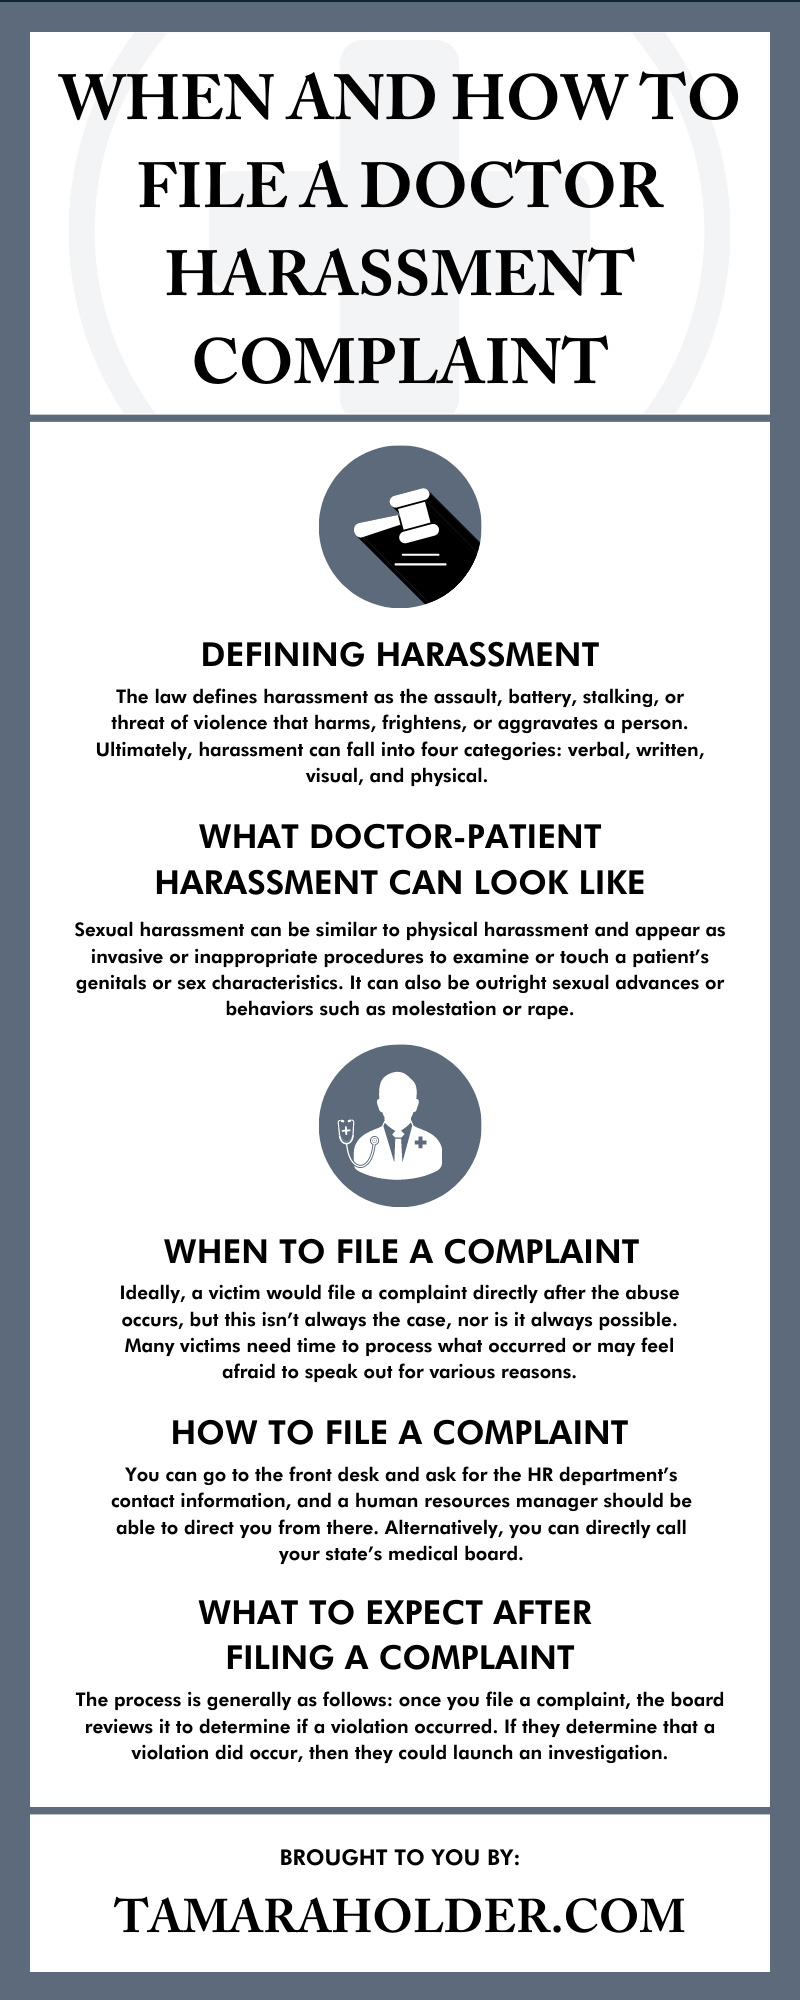 When and How To File a Doctor Harassment Complaint